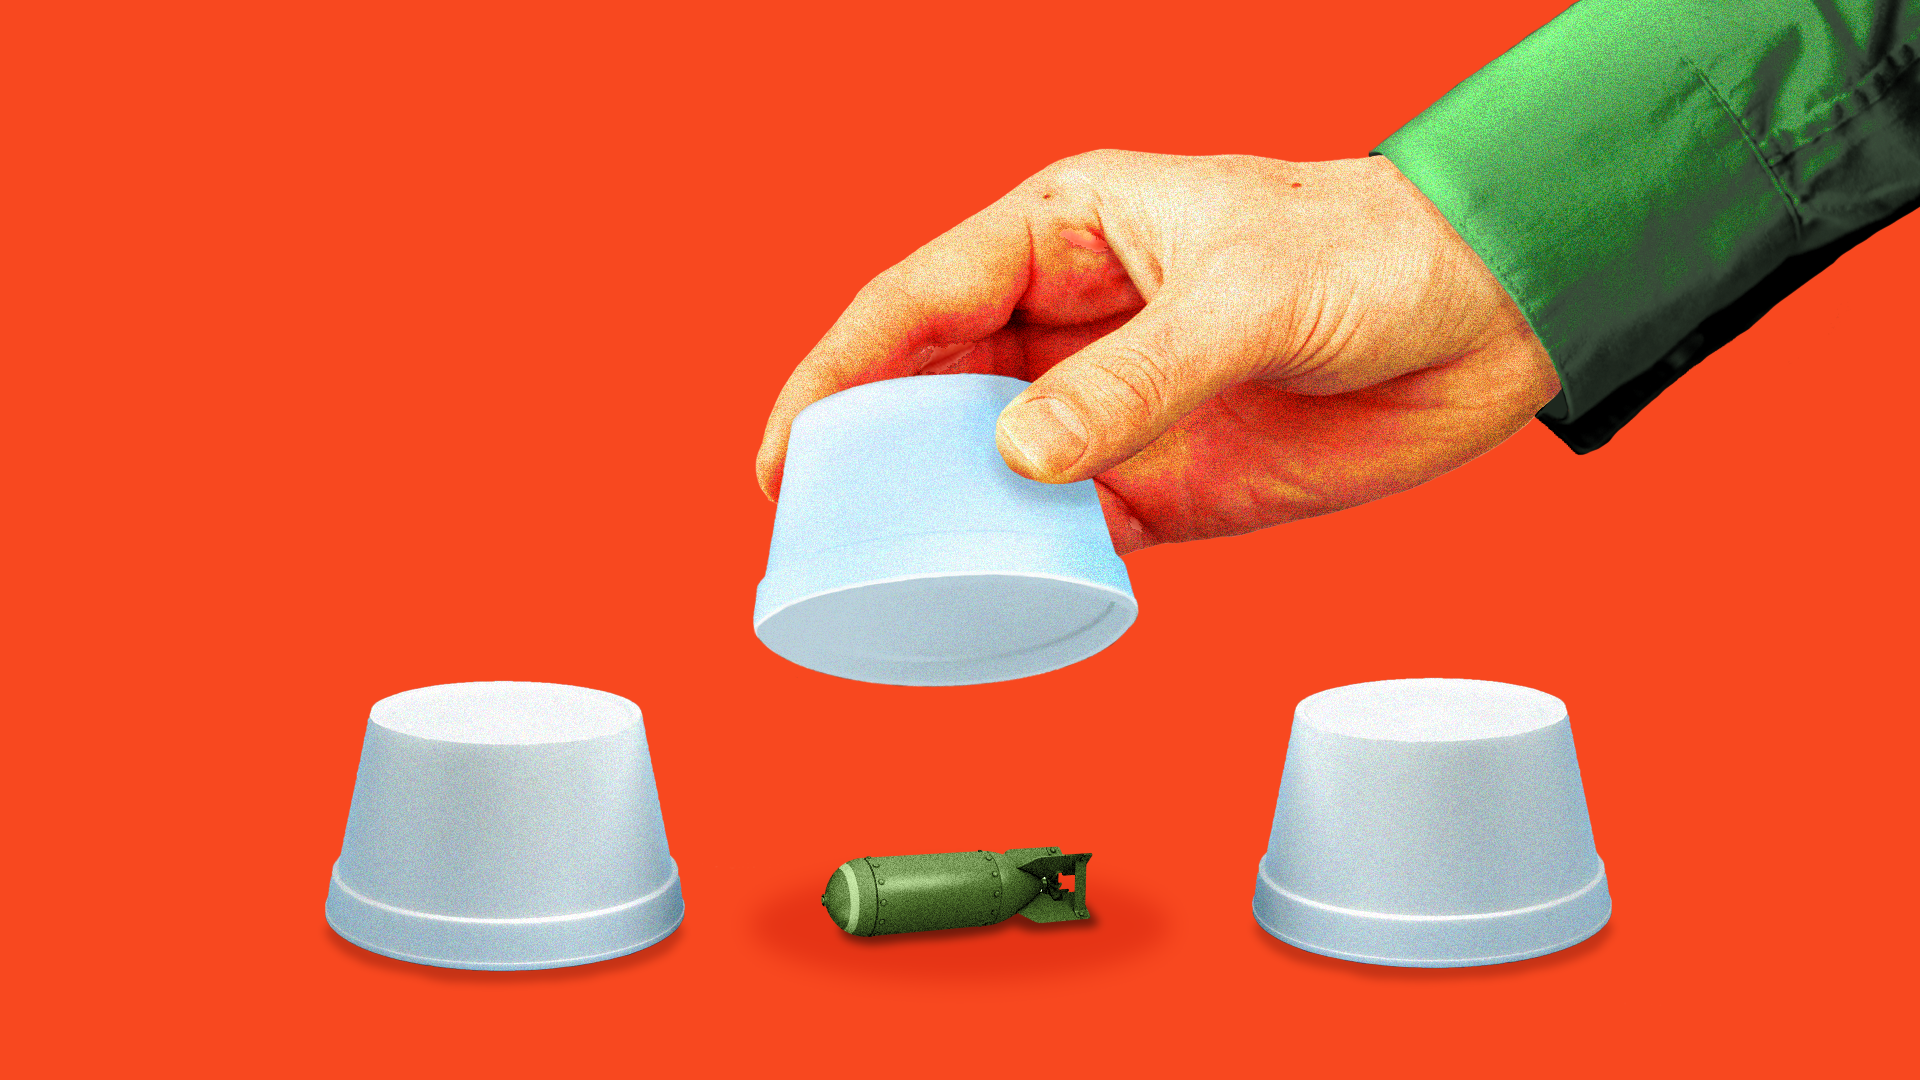 Illustration of three cups and under one is a nuclear warhead.